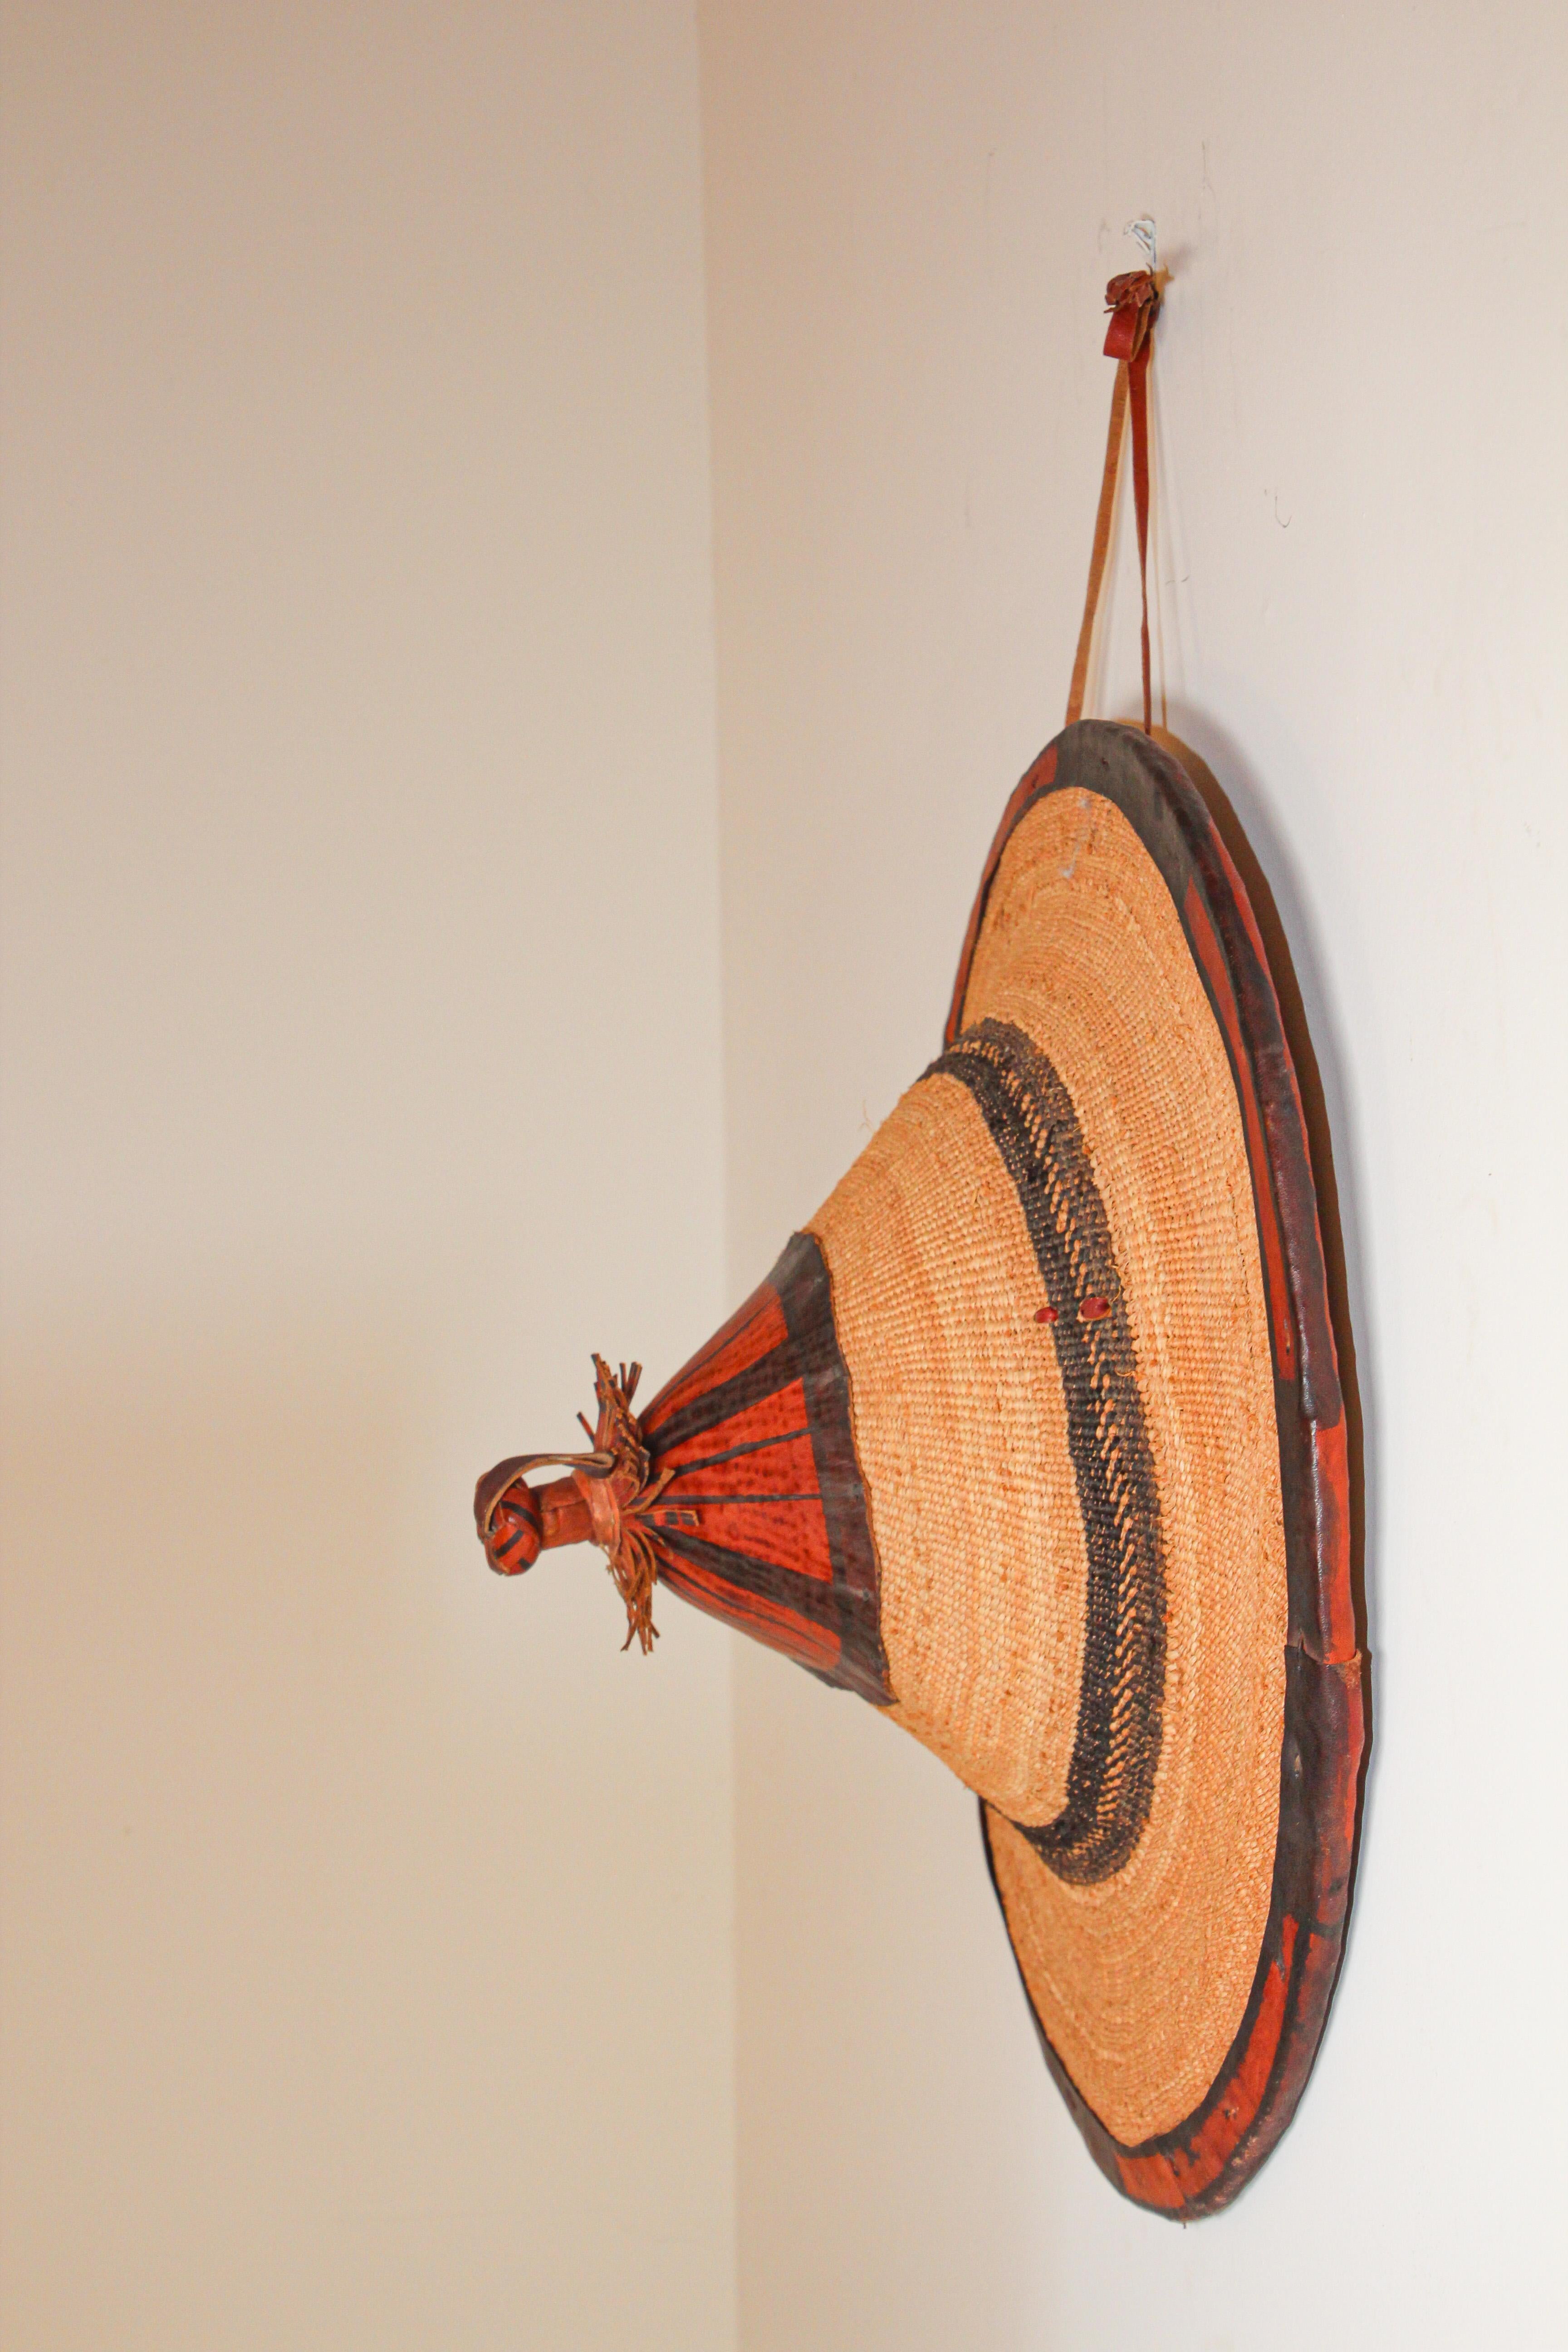 Mali West Africa Conical Leather and Straw Tribal Fulani Hat 10